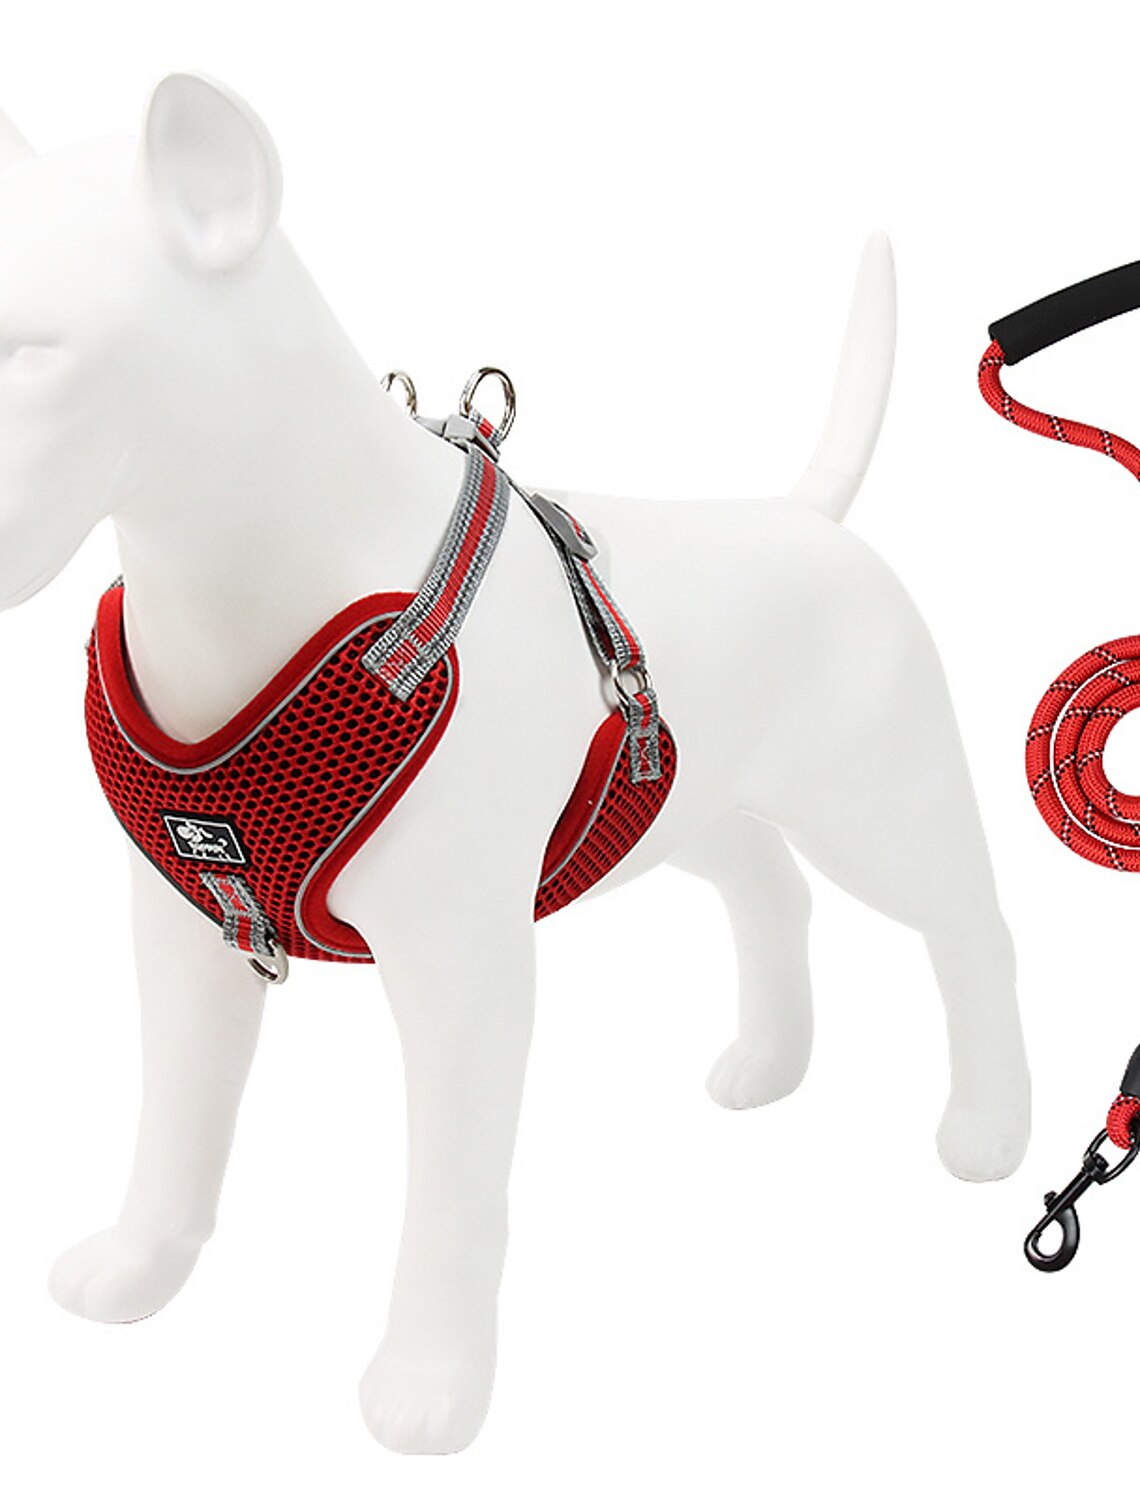 Pet Harness with 5 Metal Rings and Handle Small Red Easy Control Front Clip Car Harness No Pull Dog Harness for Small Medium Large Dogs CUDDLY PET Reflective Breathable Oxford Soft Vest